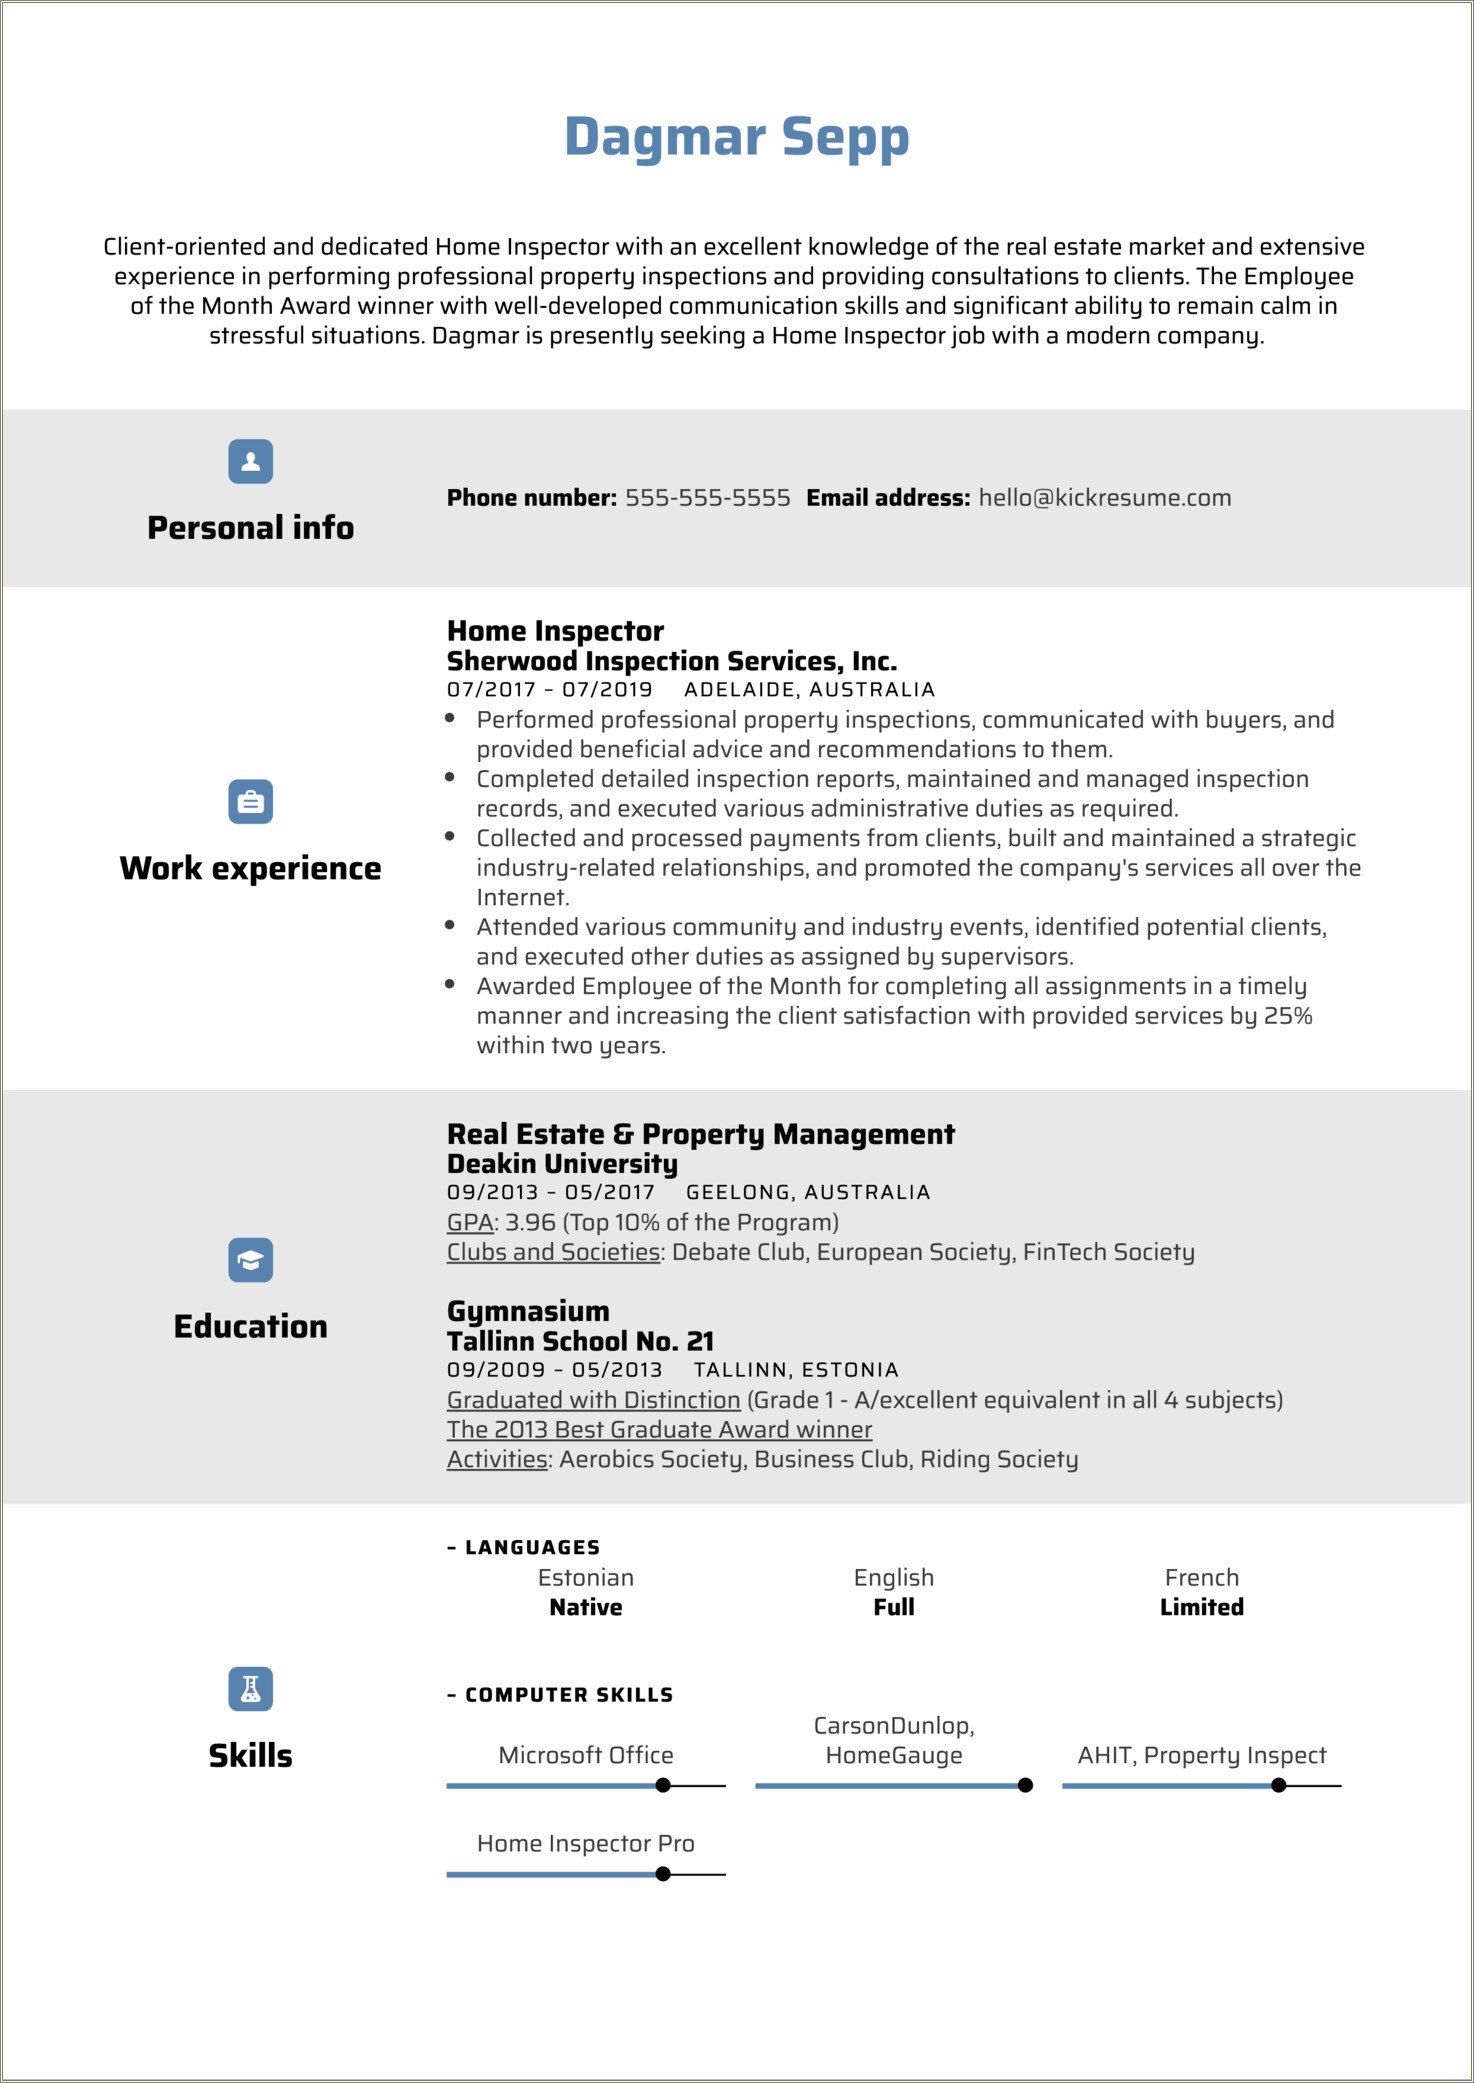 Working In Stressful Situations Skill For Resume